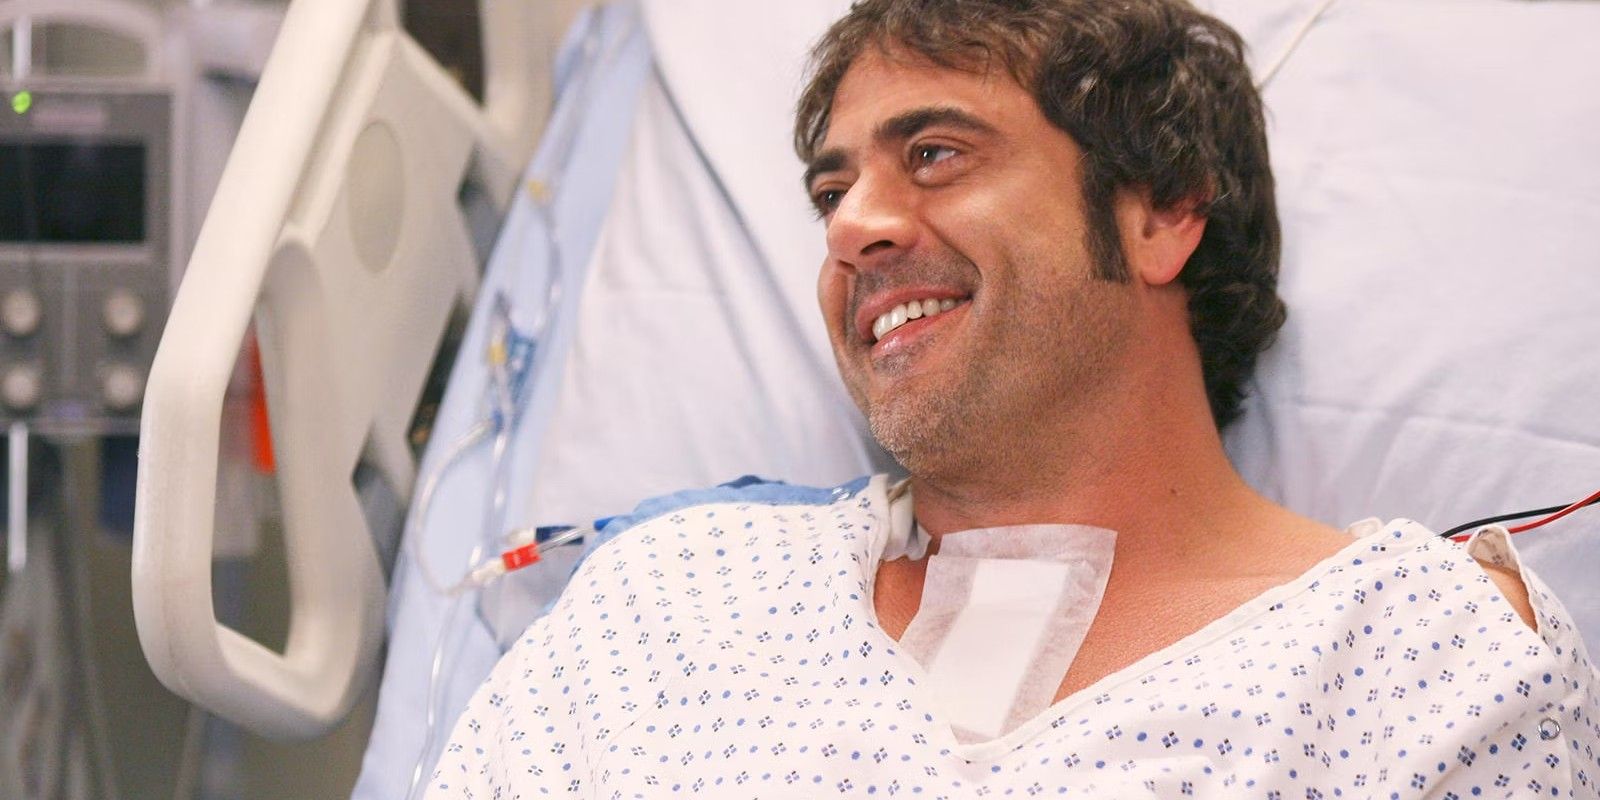 Denny Duquette smiling in hospital bed in Grey's Anatomy